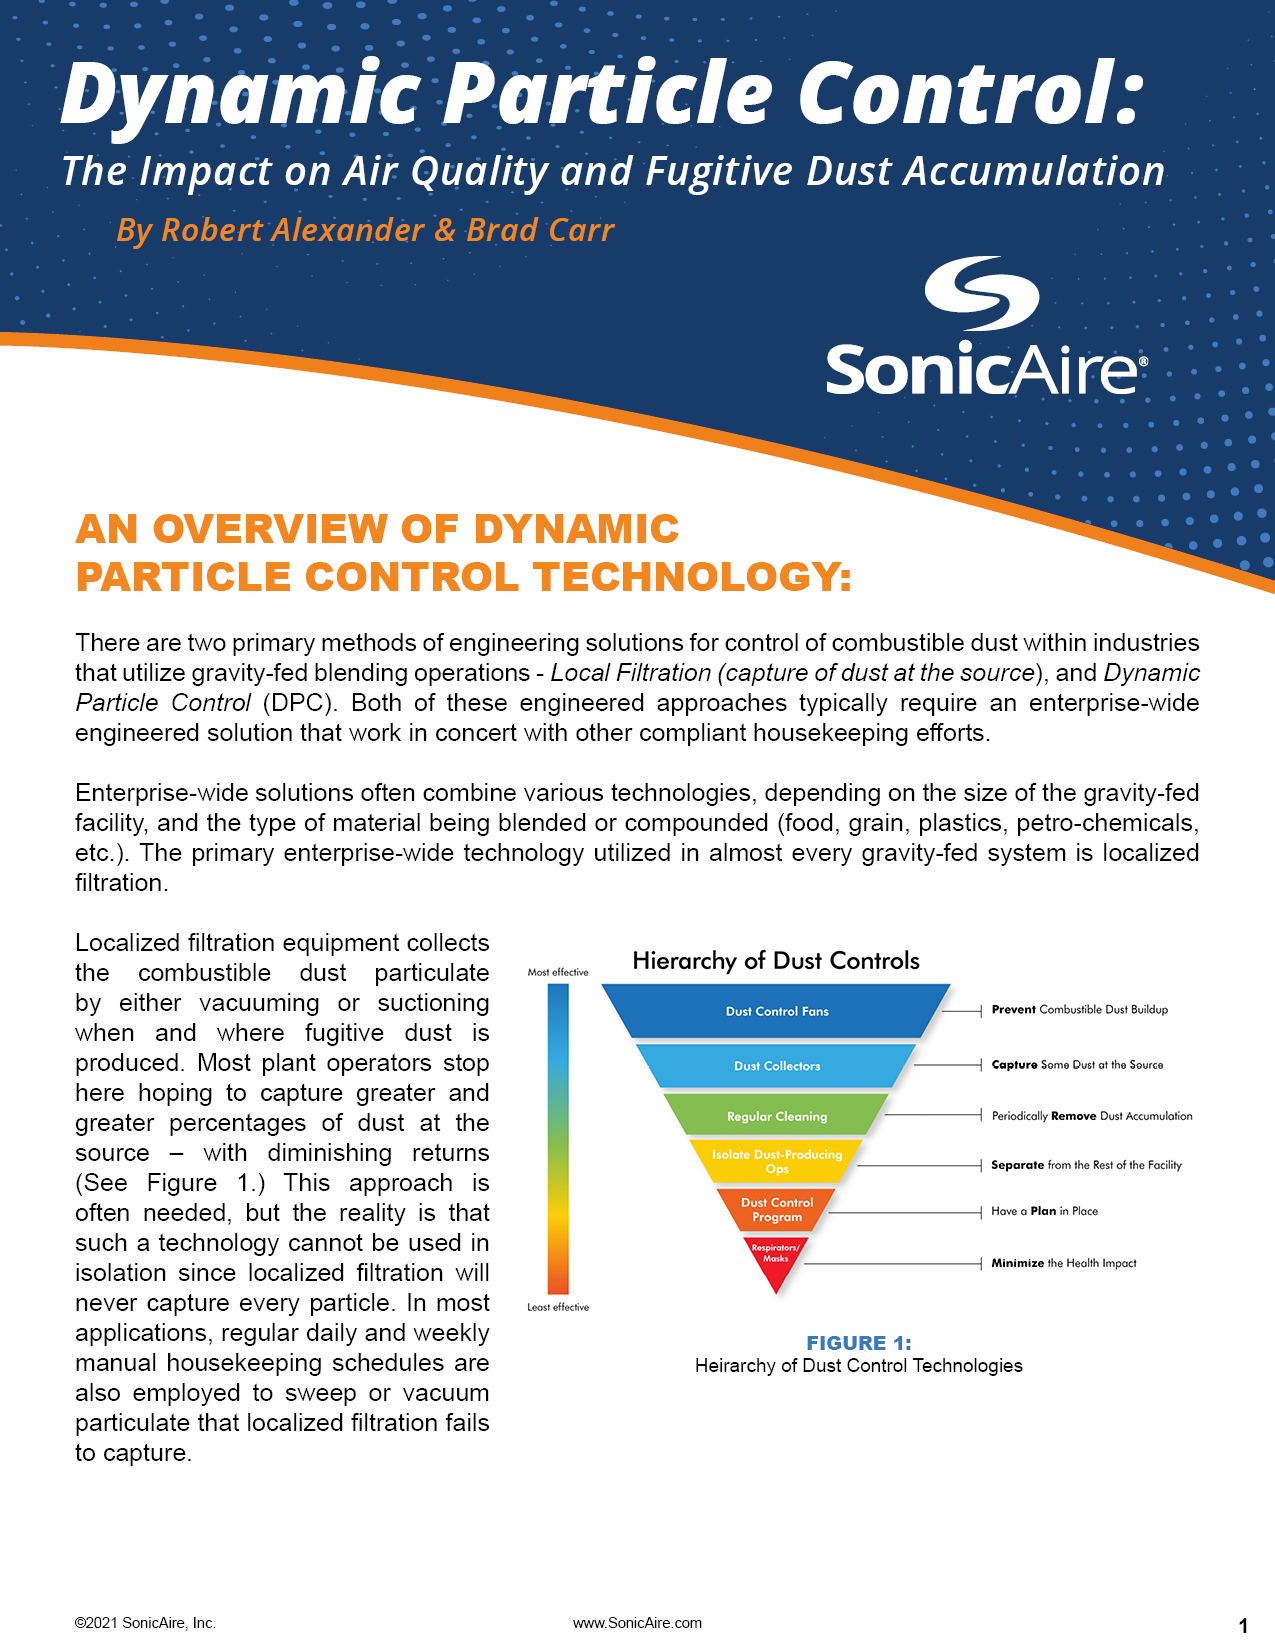 SonicAire - Dynamic Particle Control White Paper